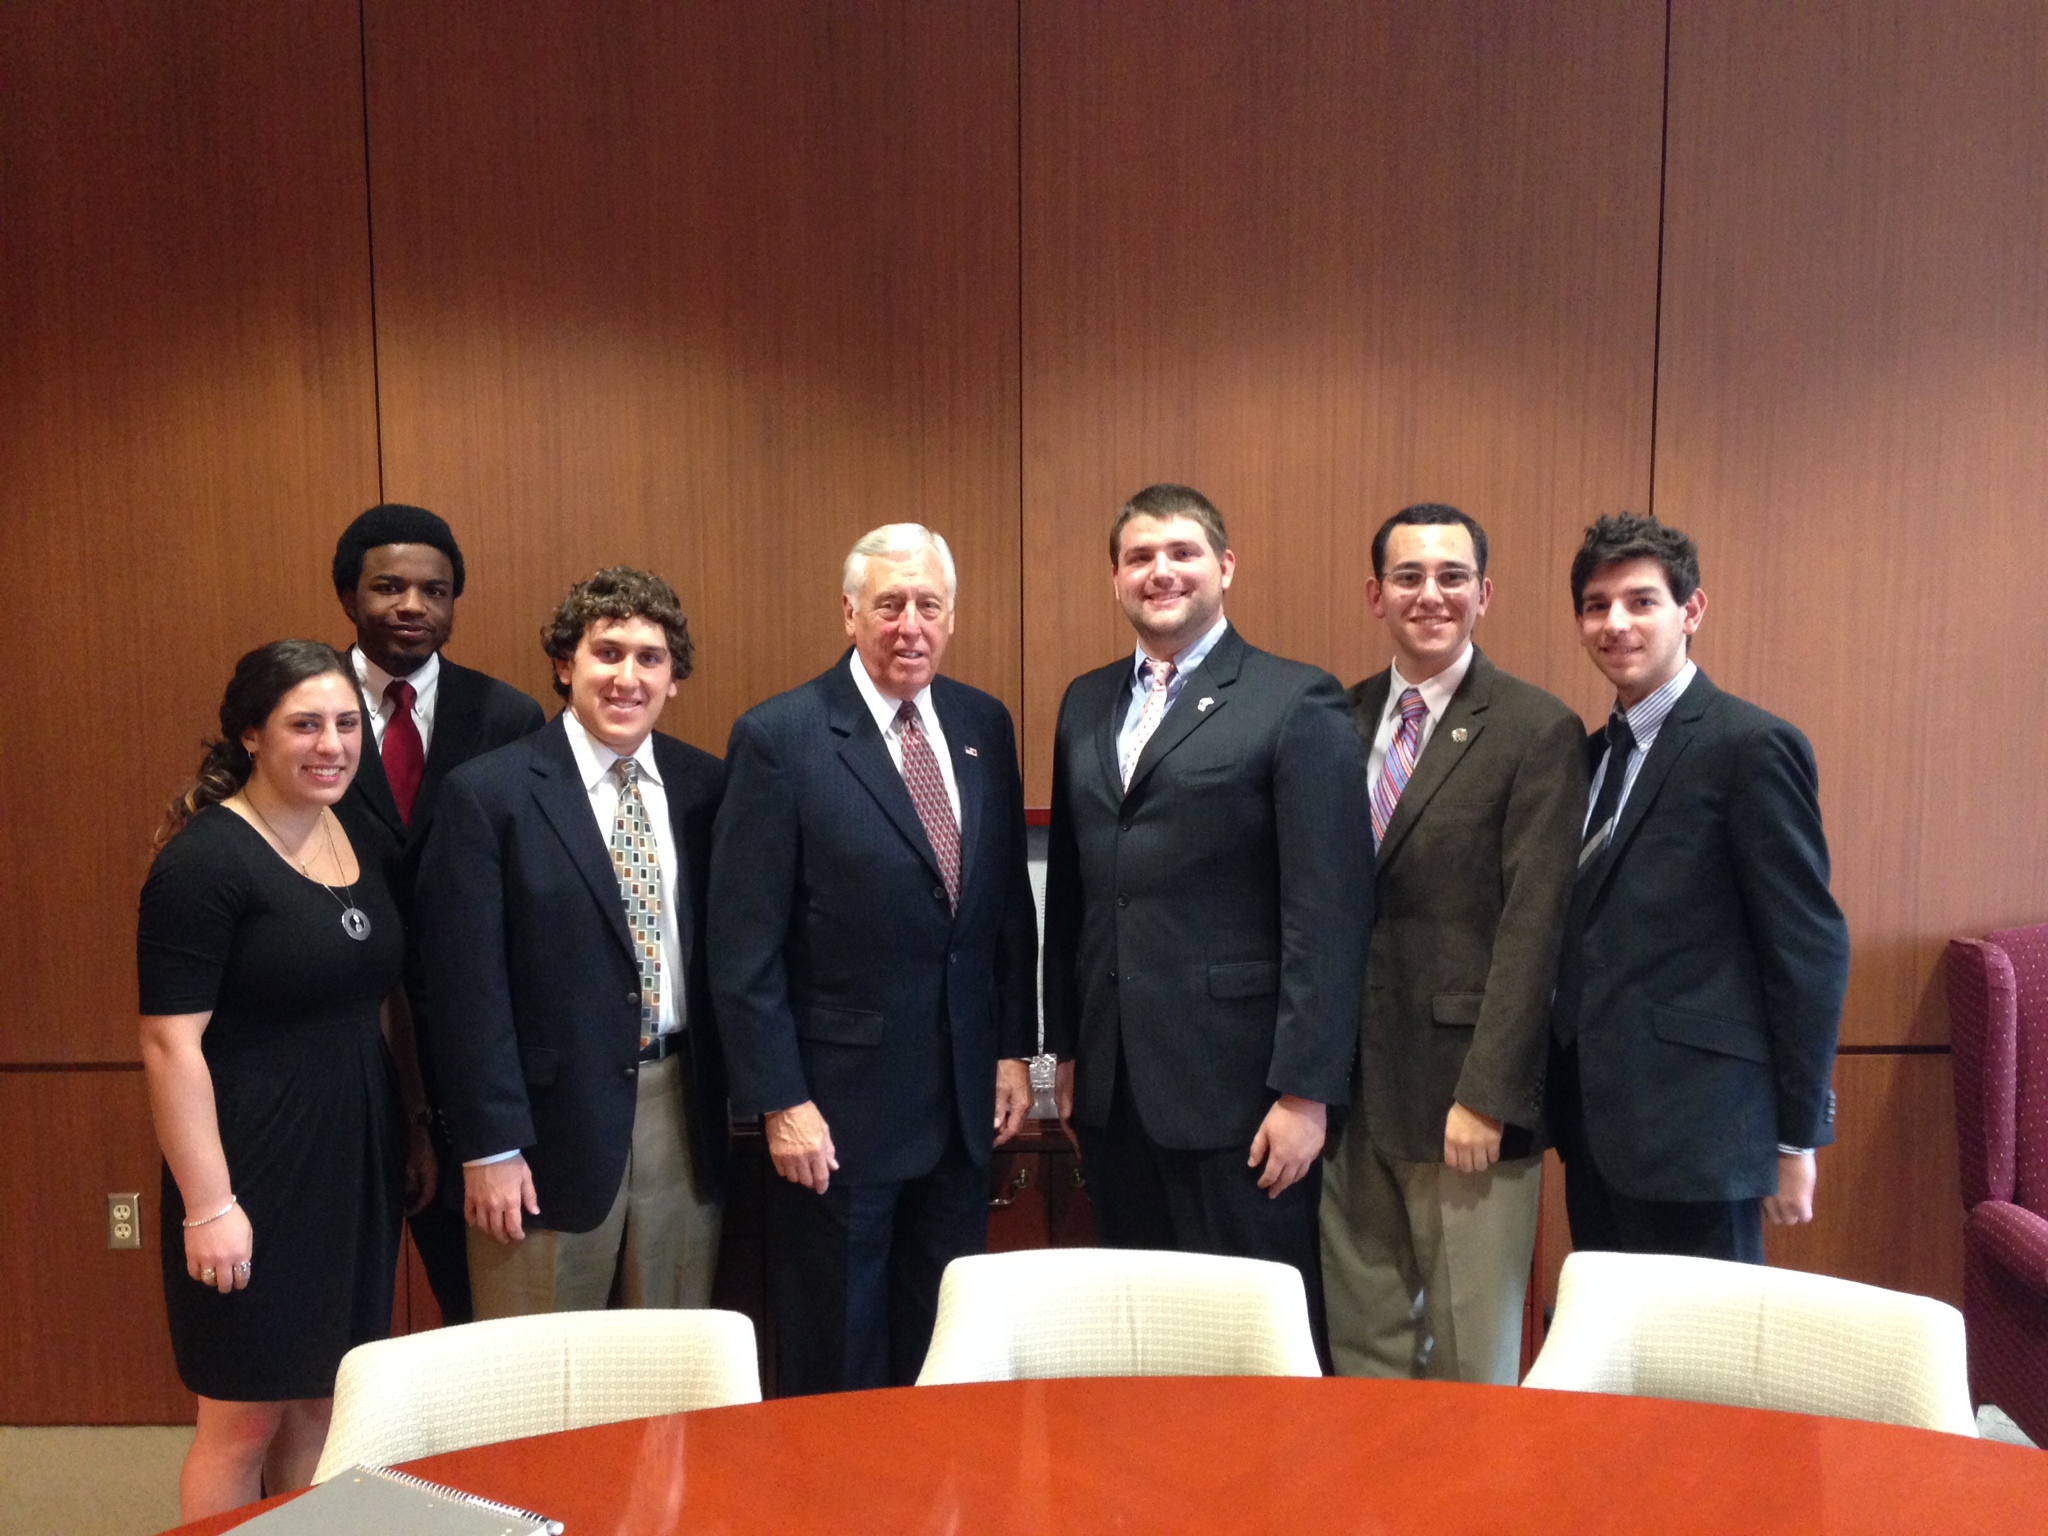 Terps for Israel sits down with Steny Hoyer